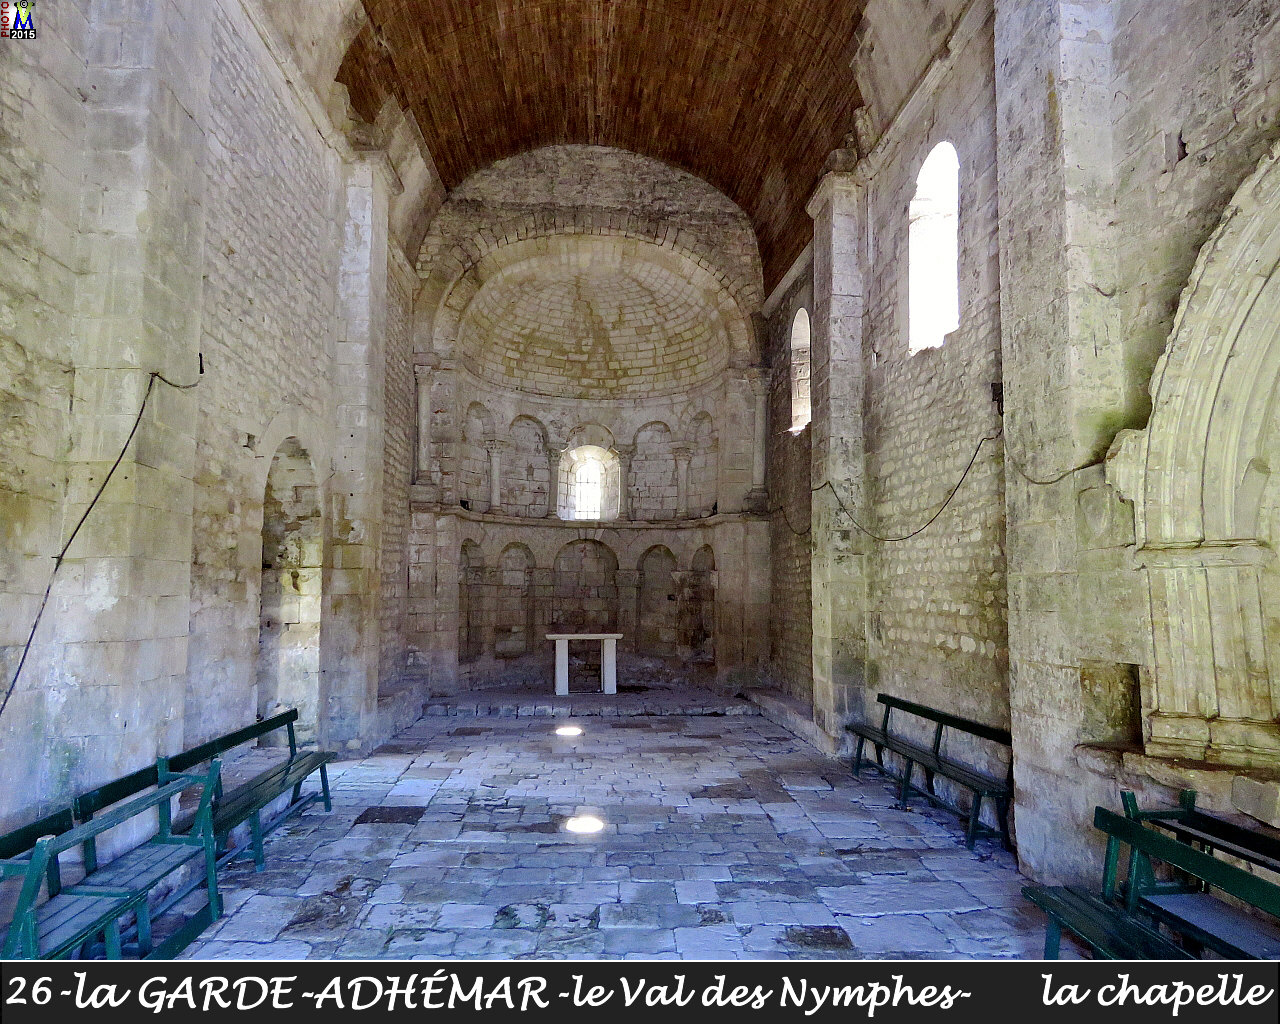 26GARDE-ADHEMARzVAL-NYMPHES_chapelle_200.jpg